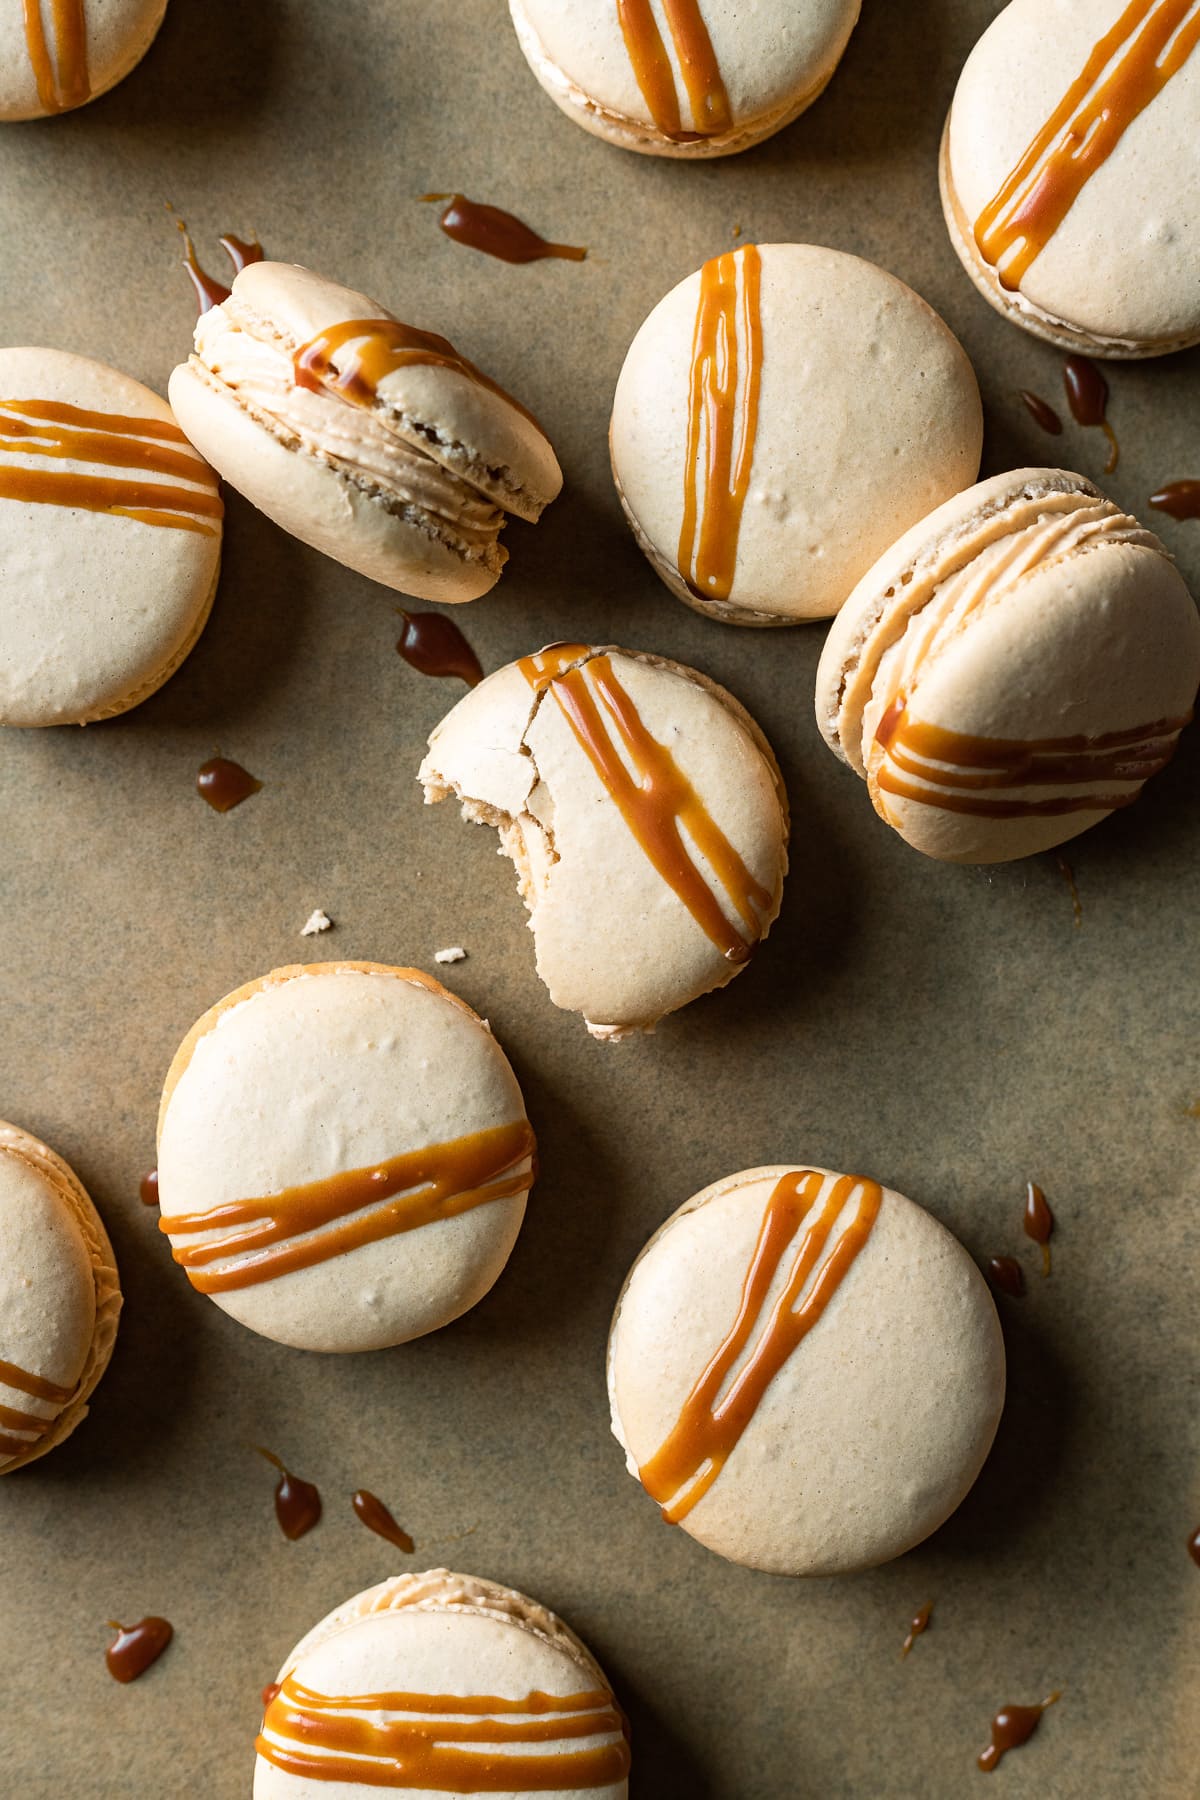 Close up of salted caramel macarons drizzled with caramel sauce on brown parchment surface. There are drips of caramel, and one macaron has a bite out of it.